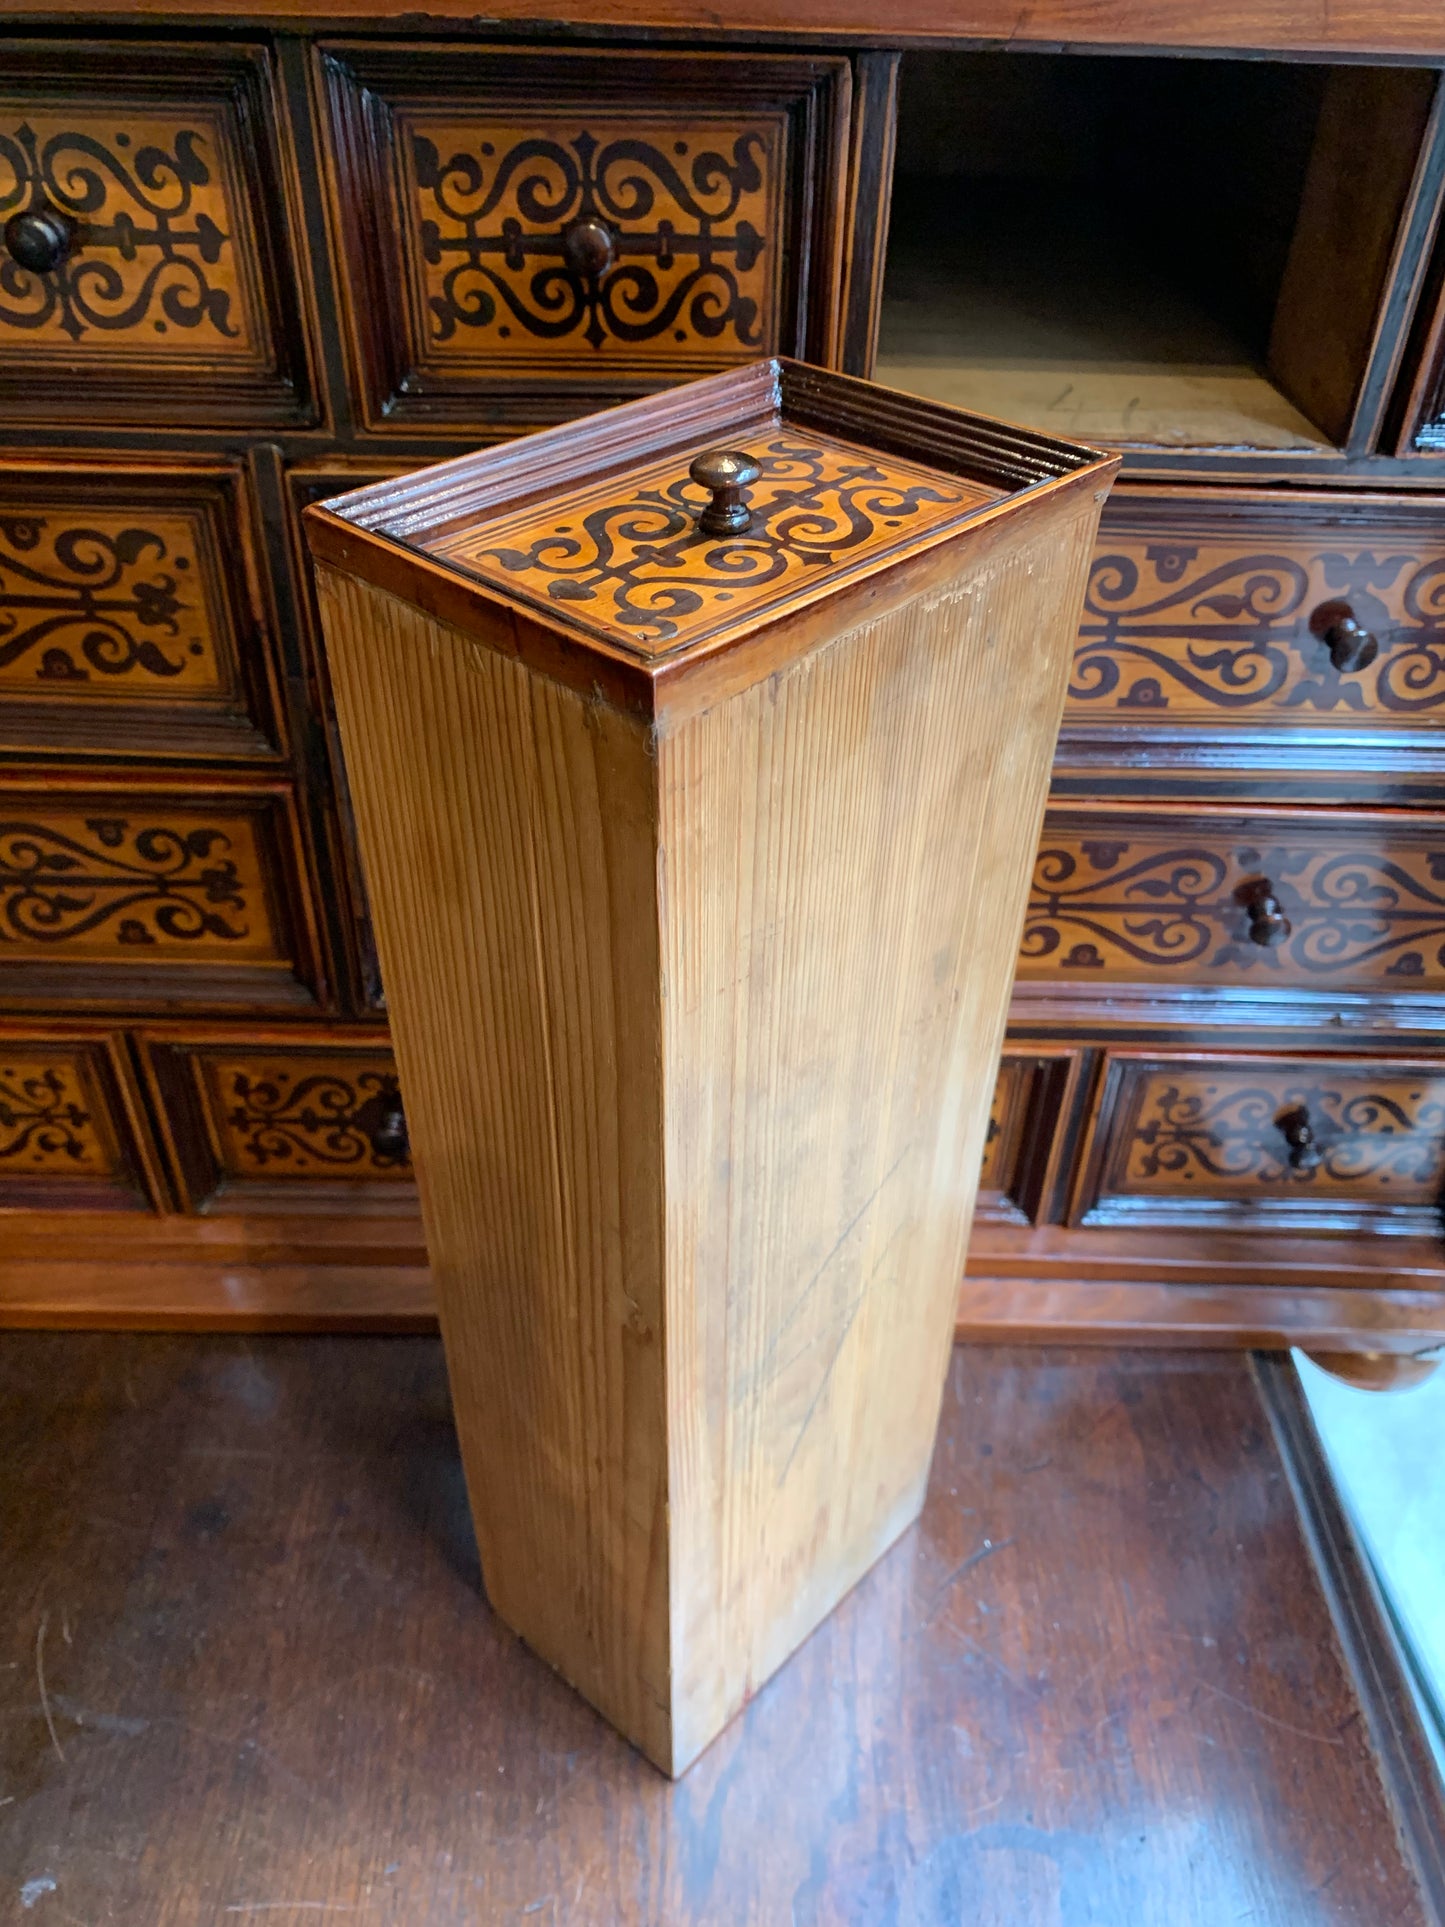 Southern Germany or Austria. A marquetry cabinet. XVII century.